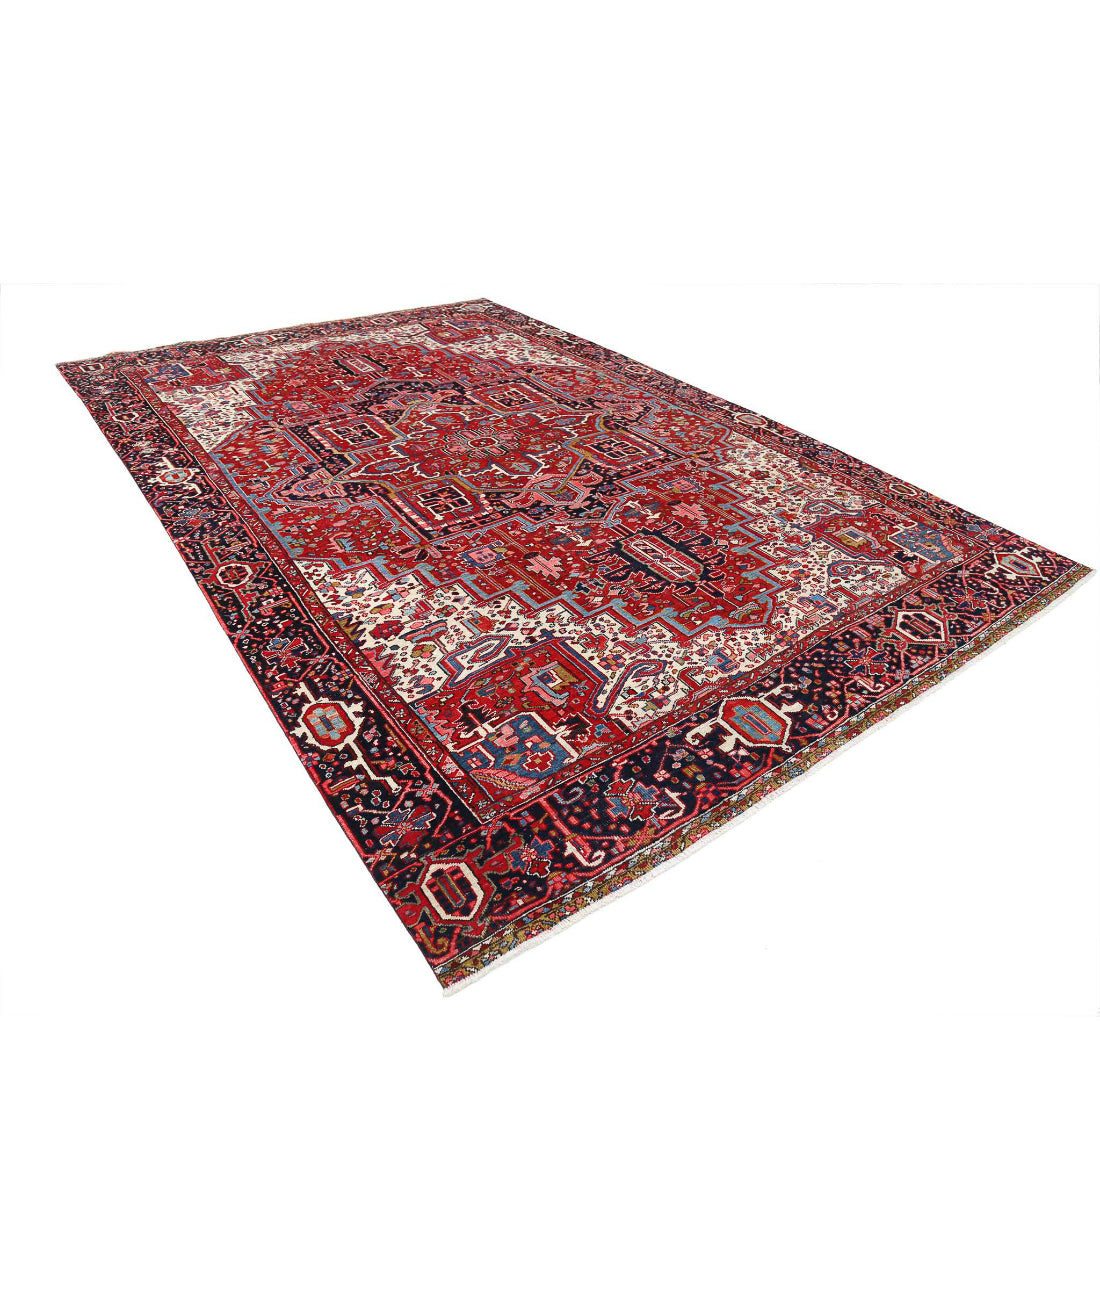 Heriz 8'9'' X 13'3'' Hand-Knotted Wool Rug 8'9'' x 13'3'' (263 X 398) / Red / Blue